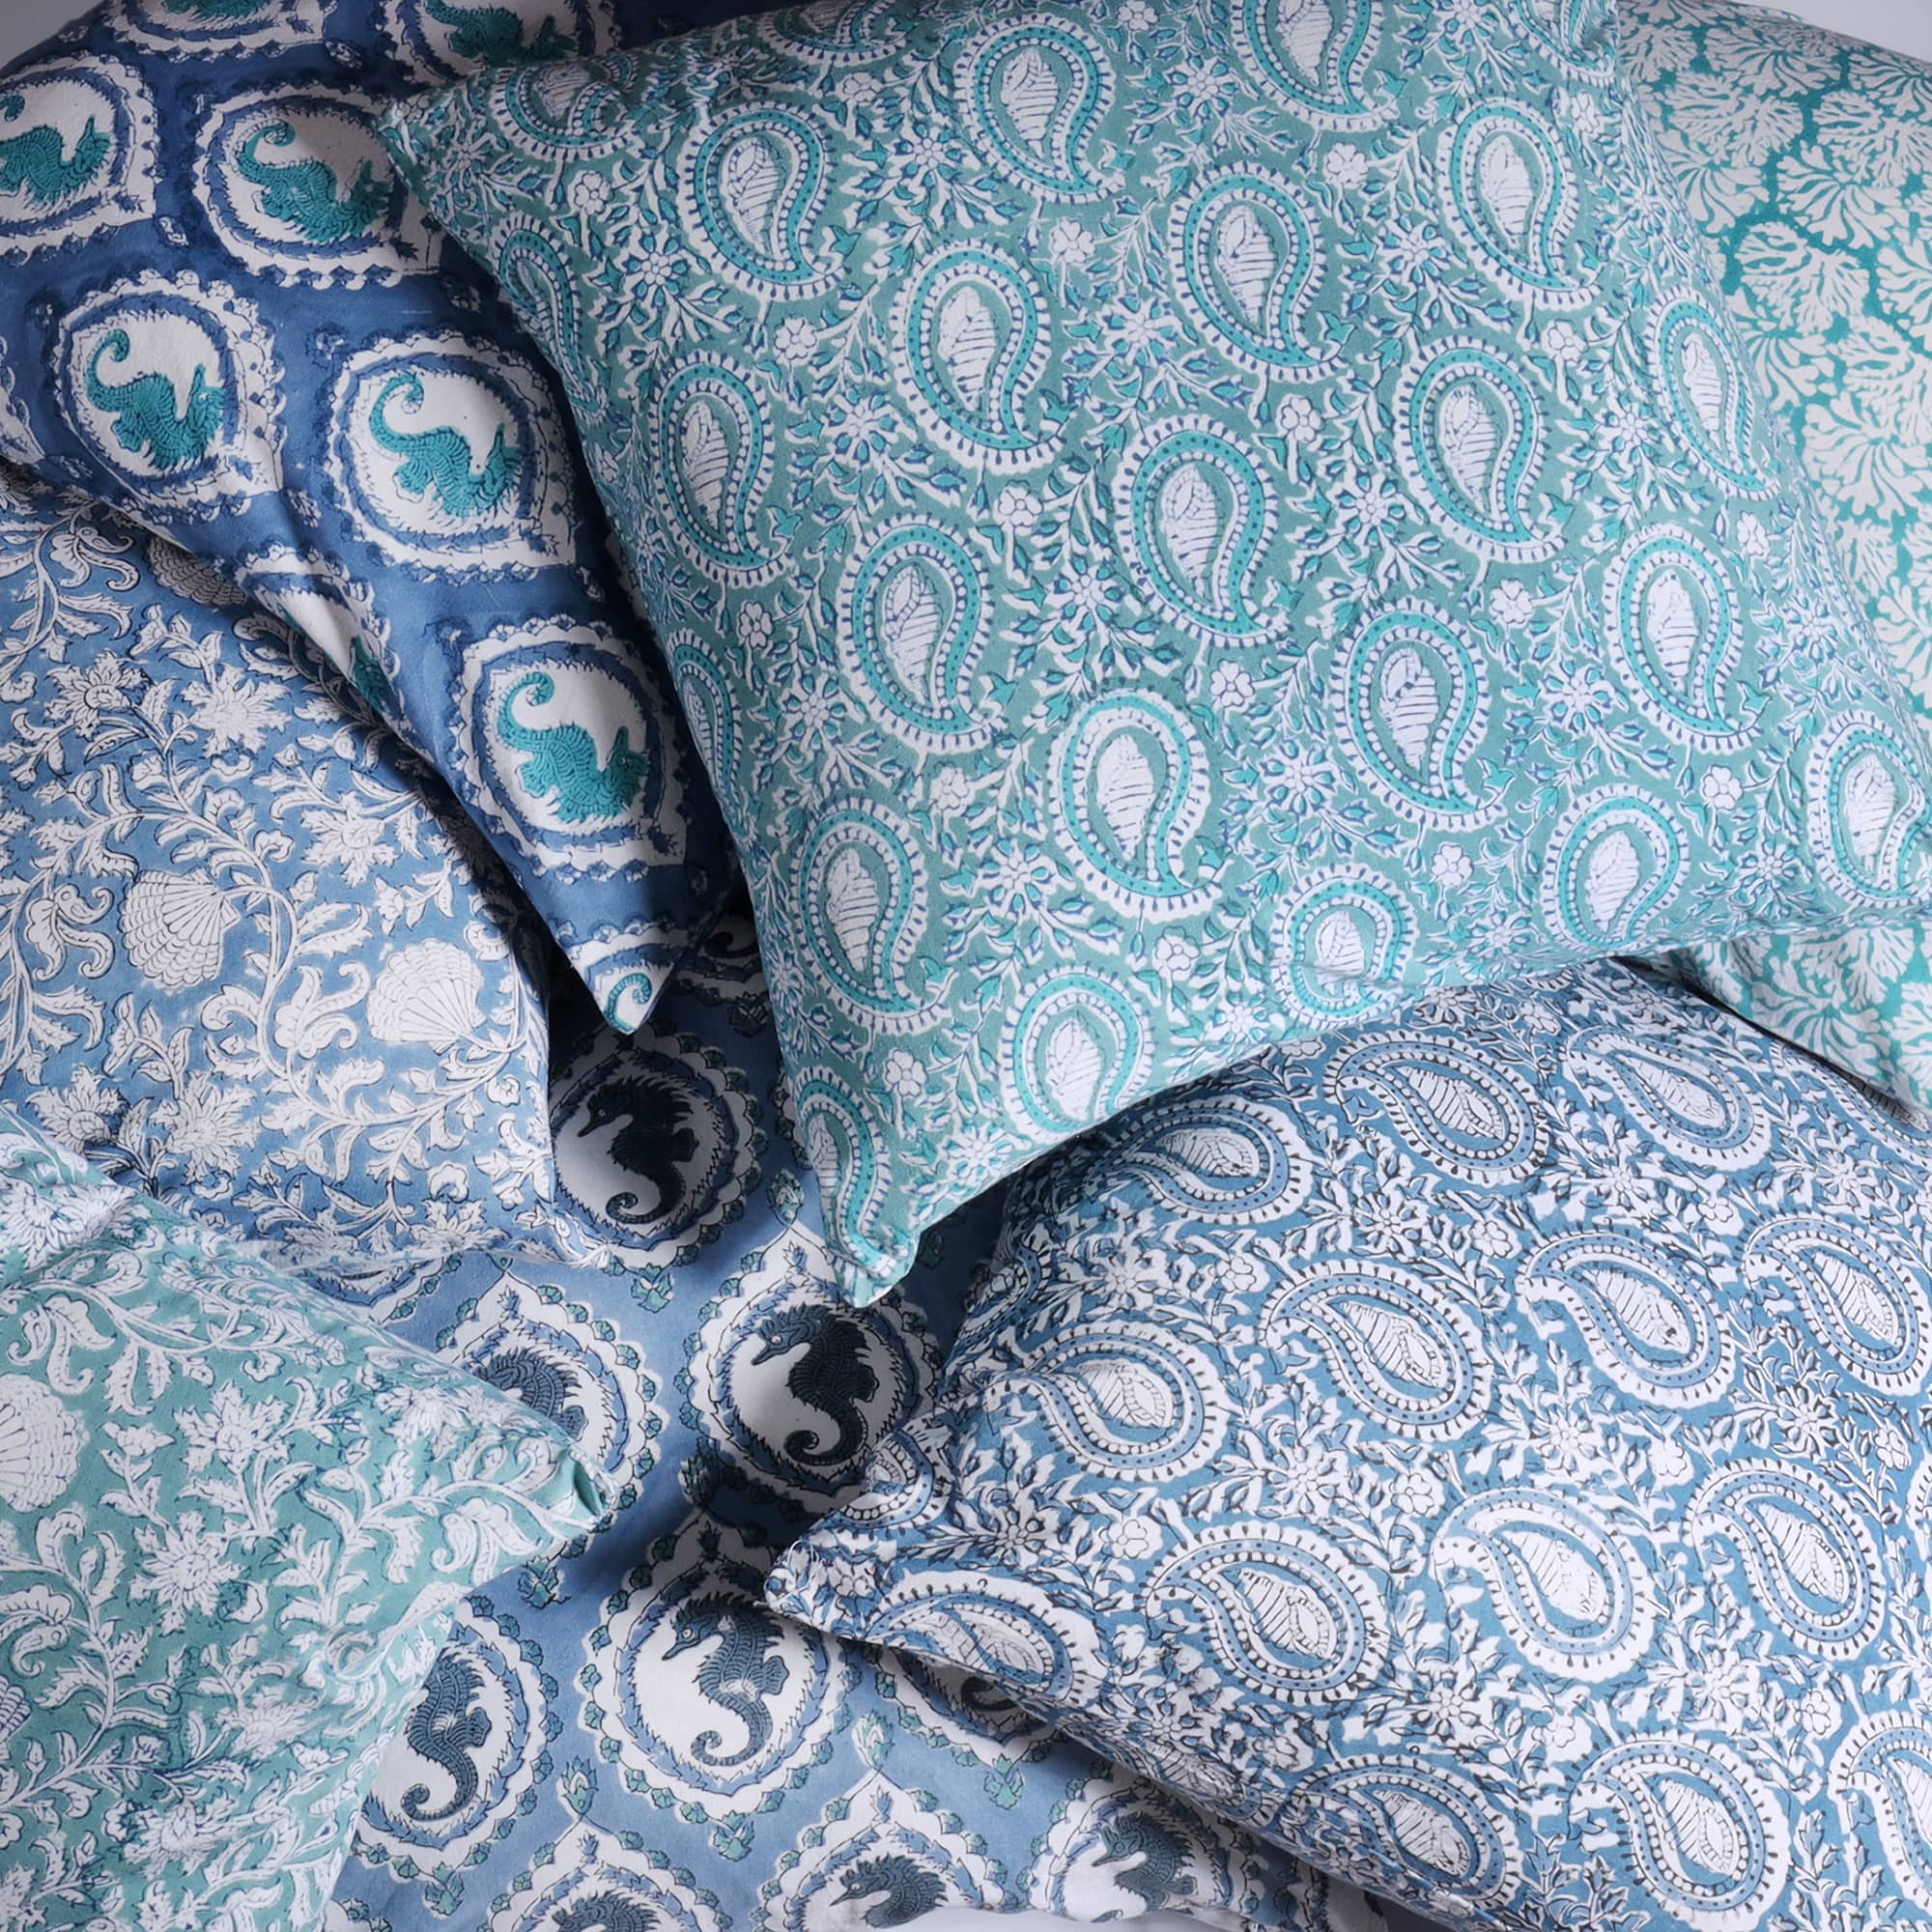 Marine Blue Seahorse Cameo cushion which is Hand block printed fabric on a pile of other Hand block printed cushions